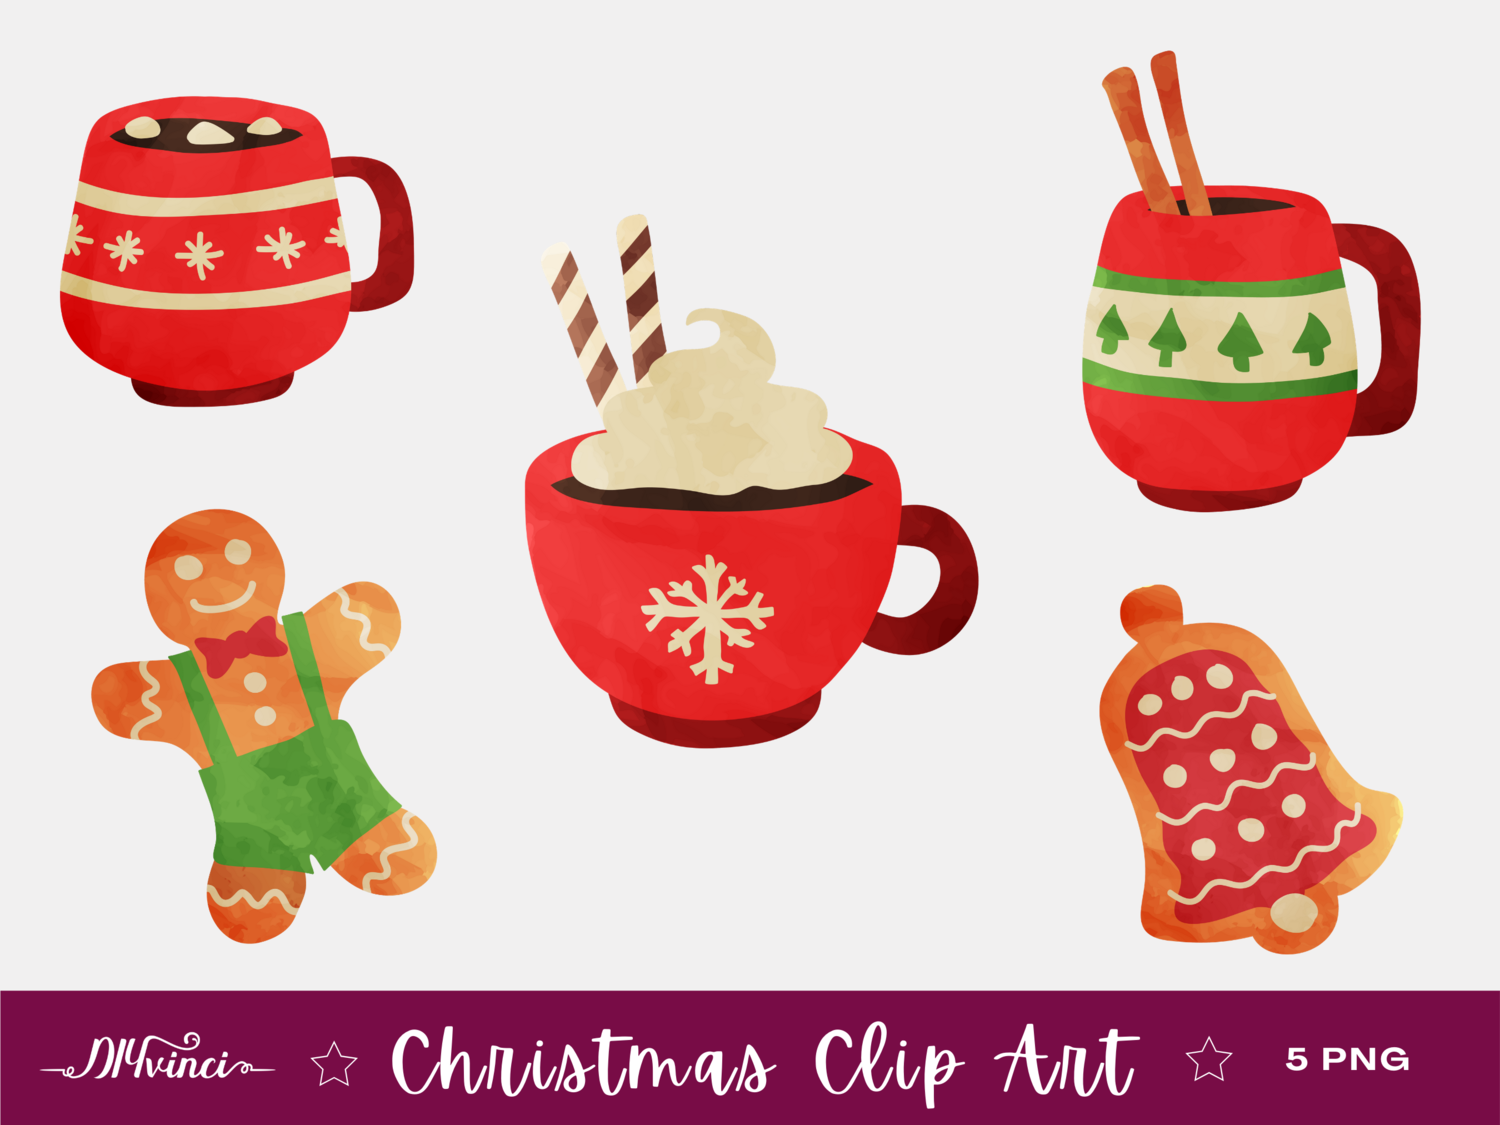 Christmas Clipart Hot Chocolate & Cookies - PNG - Personal and Commercial Use